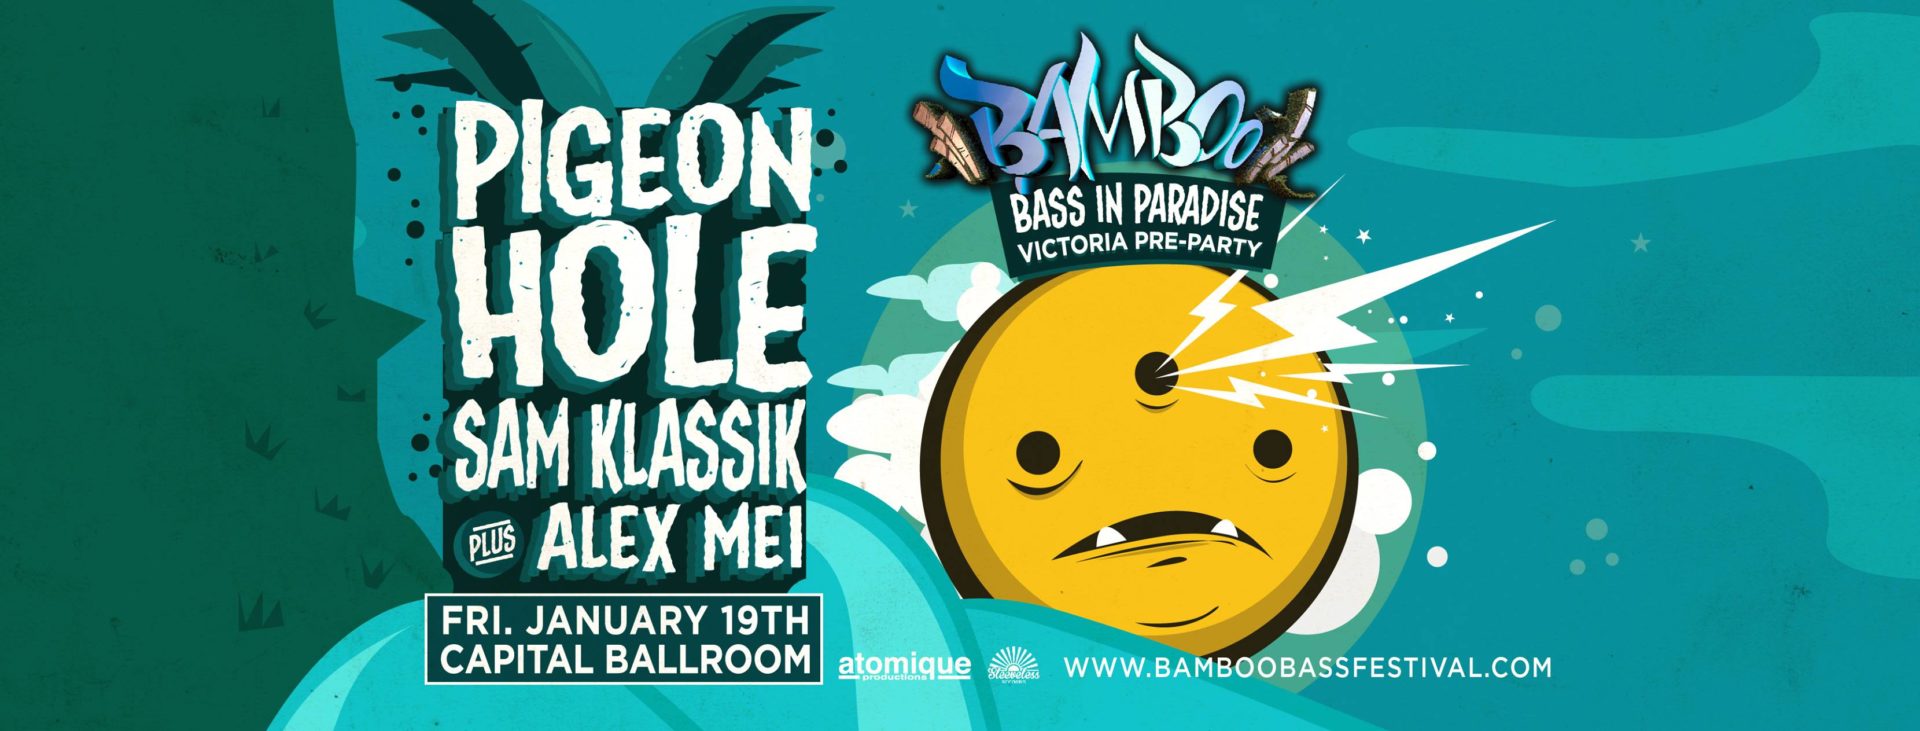 Bamboo Bass Pre Party Poster Victoria